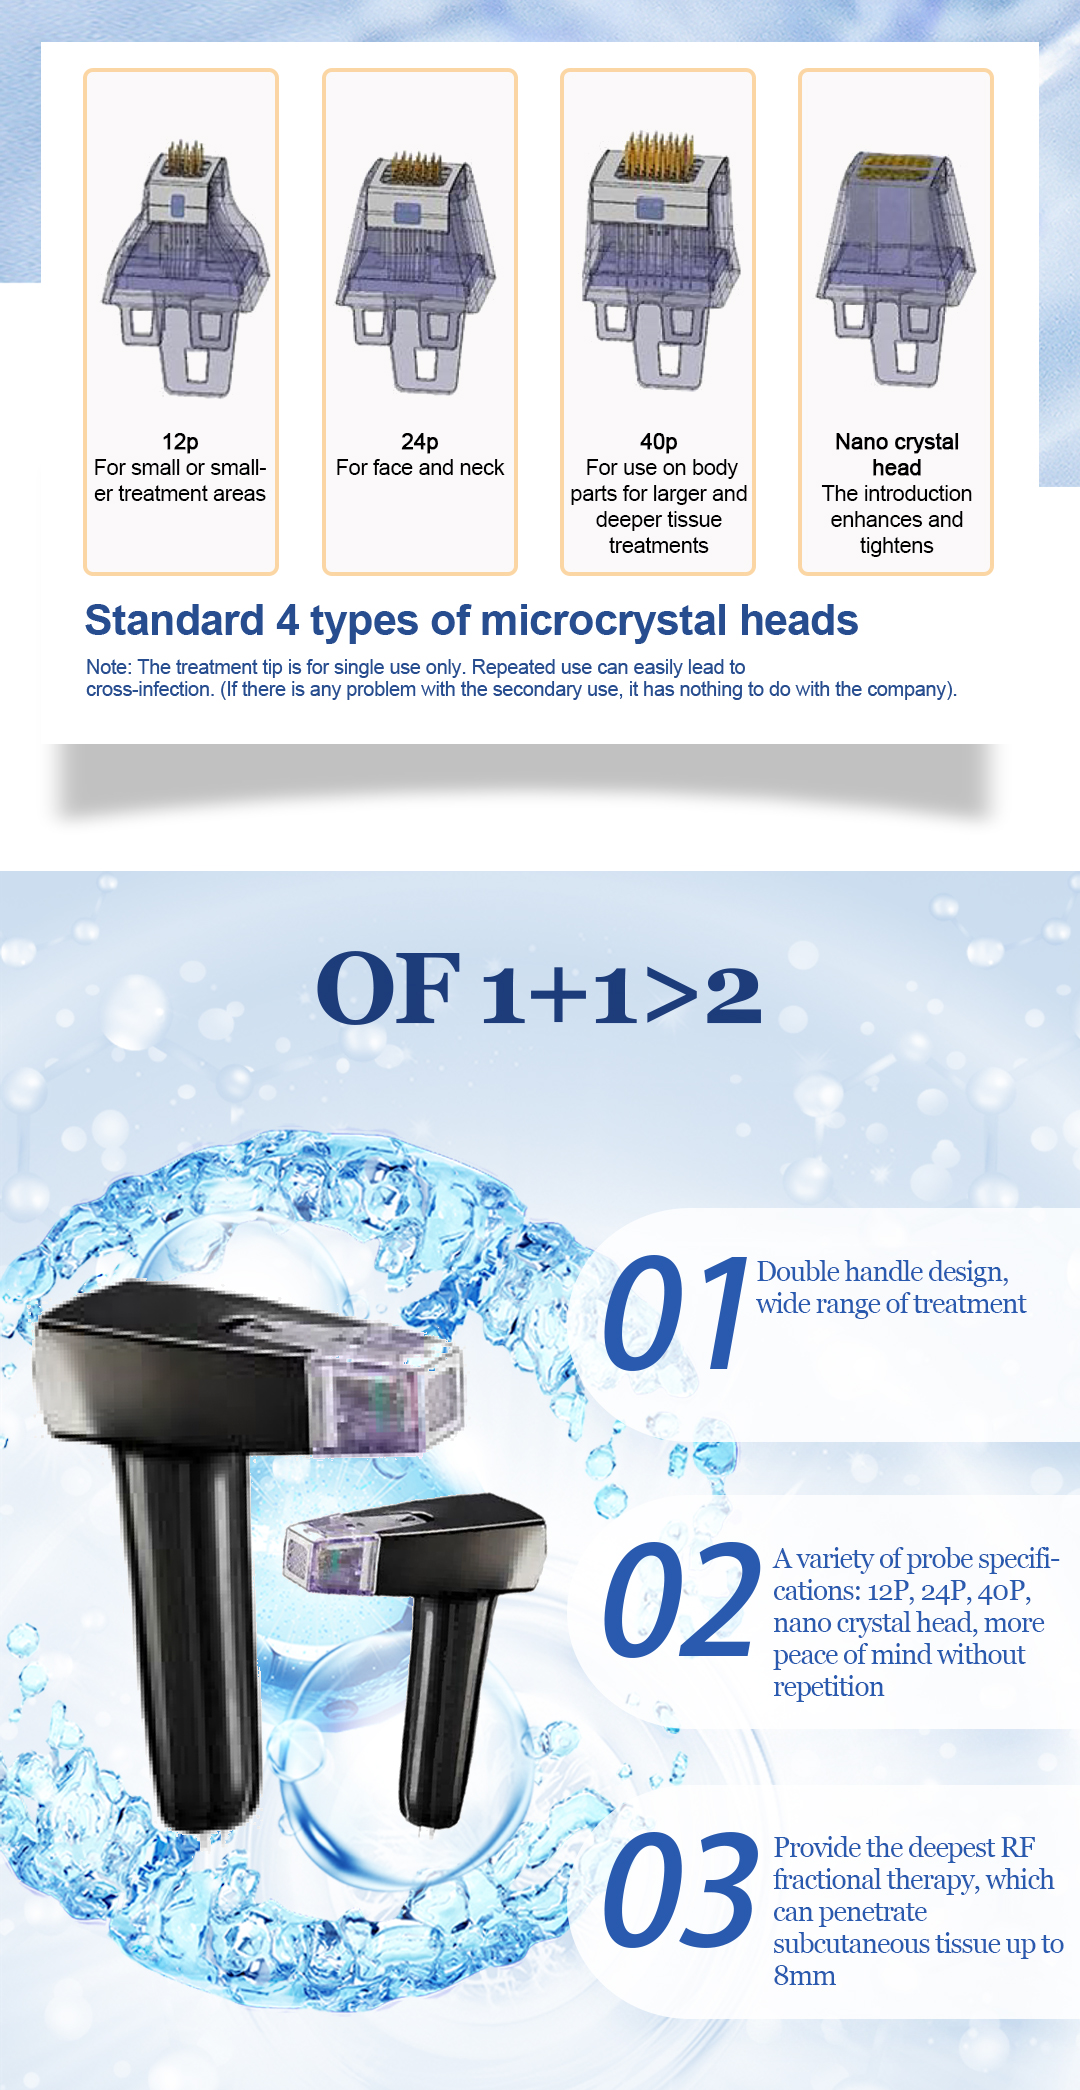 The latest Product Fractional RF Microneedle Depth Mopheus8